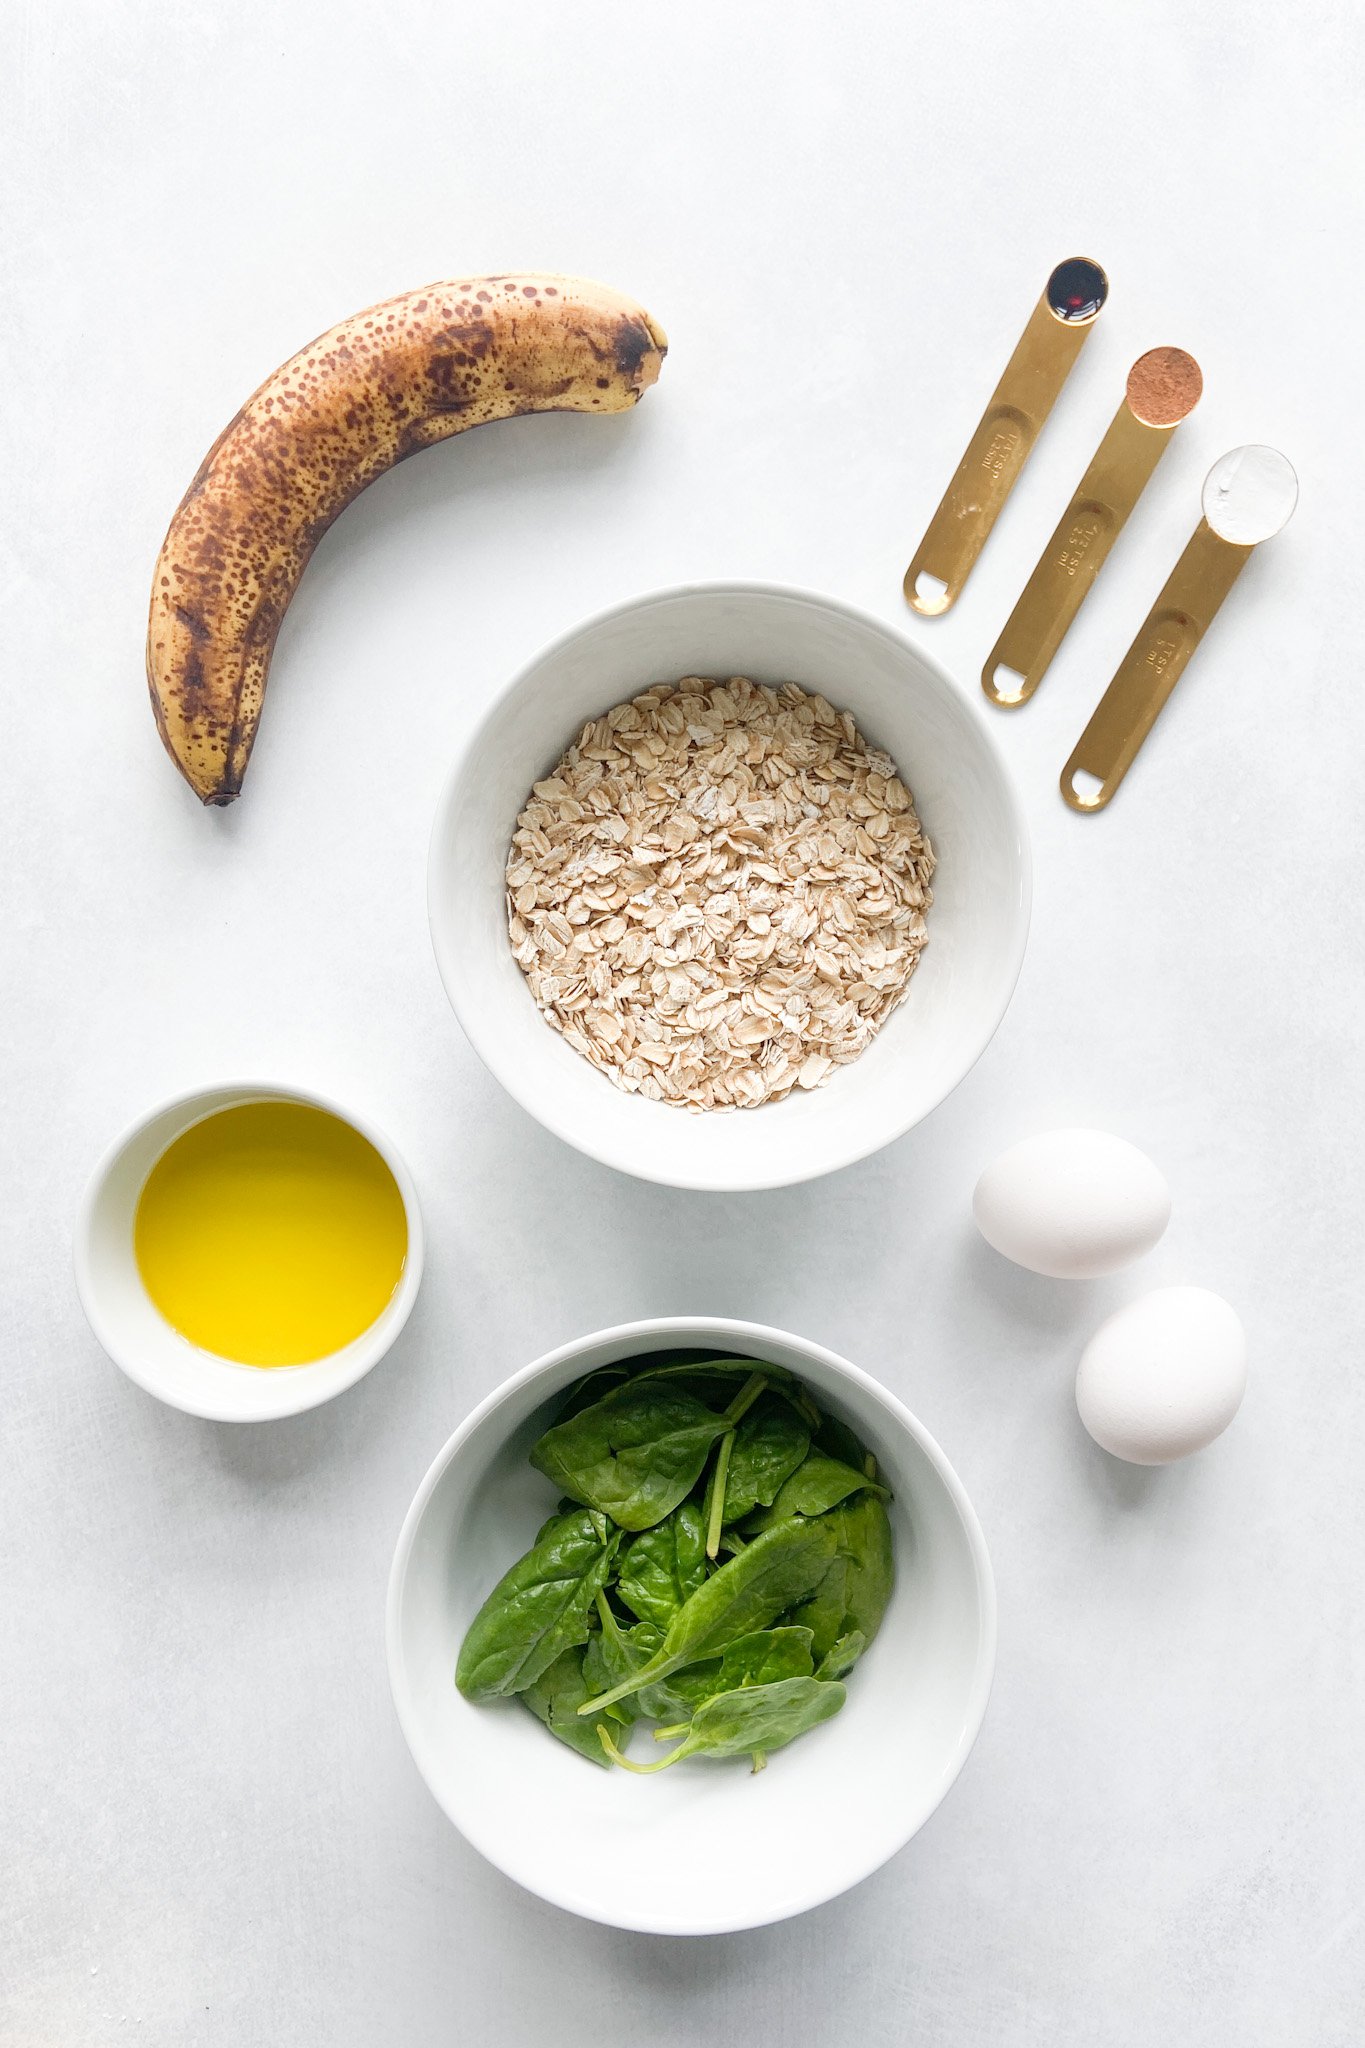 Ingredients to make spinach banana pancakes. See recipe card for detailed ingredient quantities.